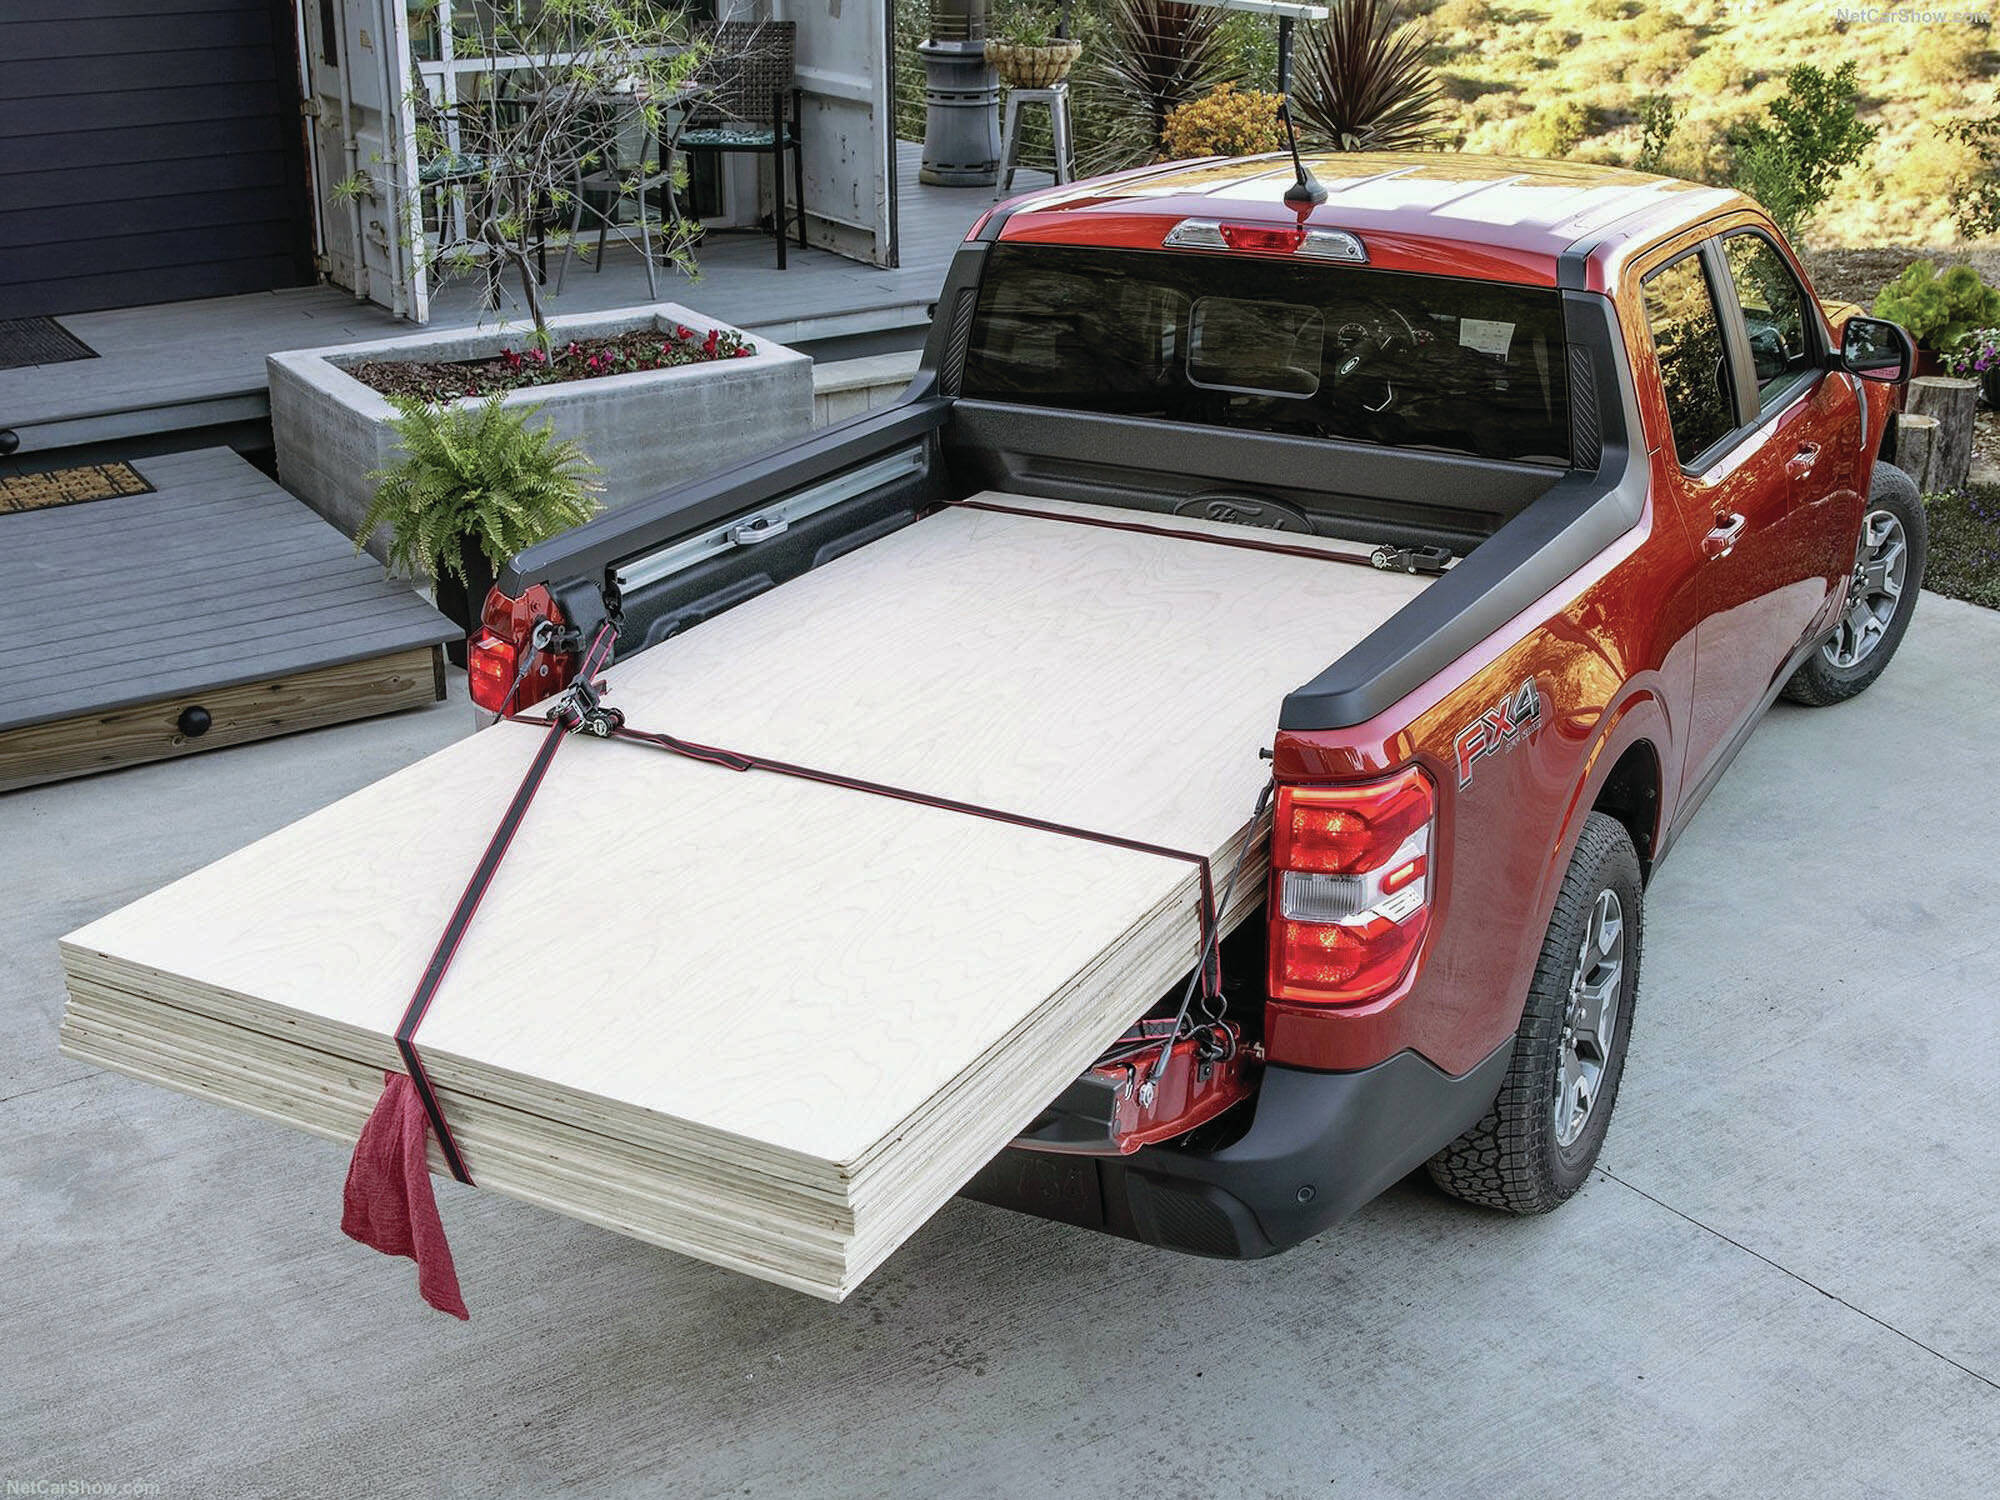 Ford claims the Maverick can carry 18 4x8 sheets of three-quarter-inch plywood flat on the load floor, but with the tailgate lowered, of course.